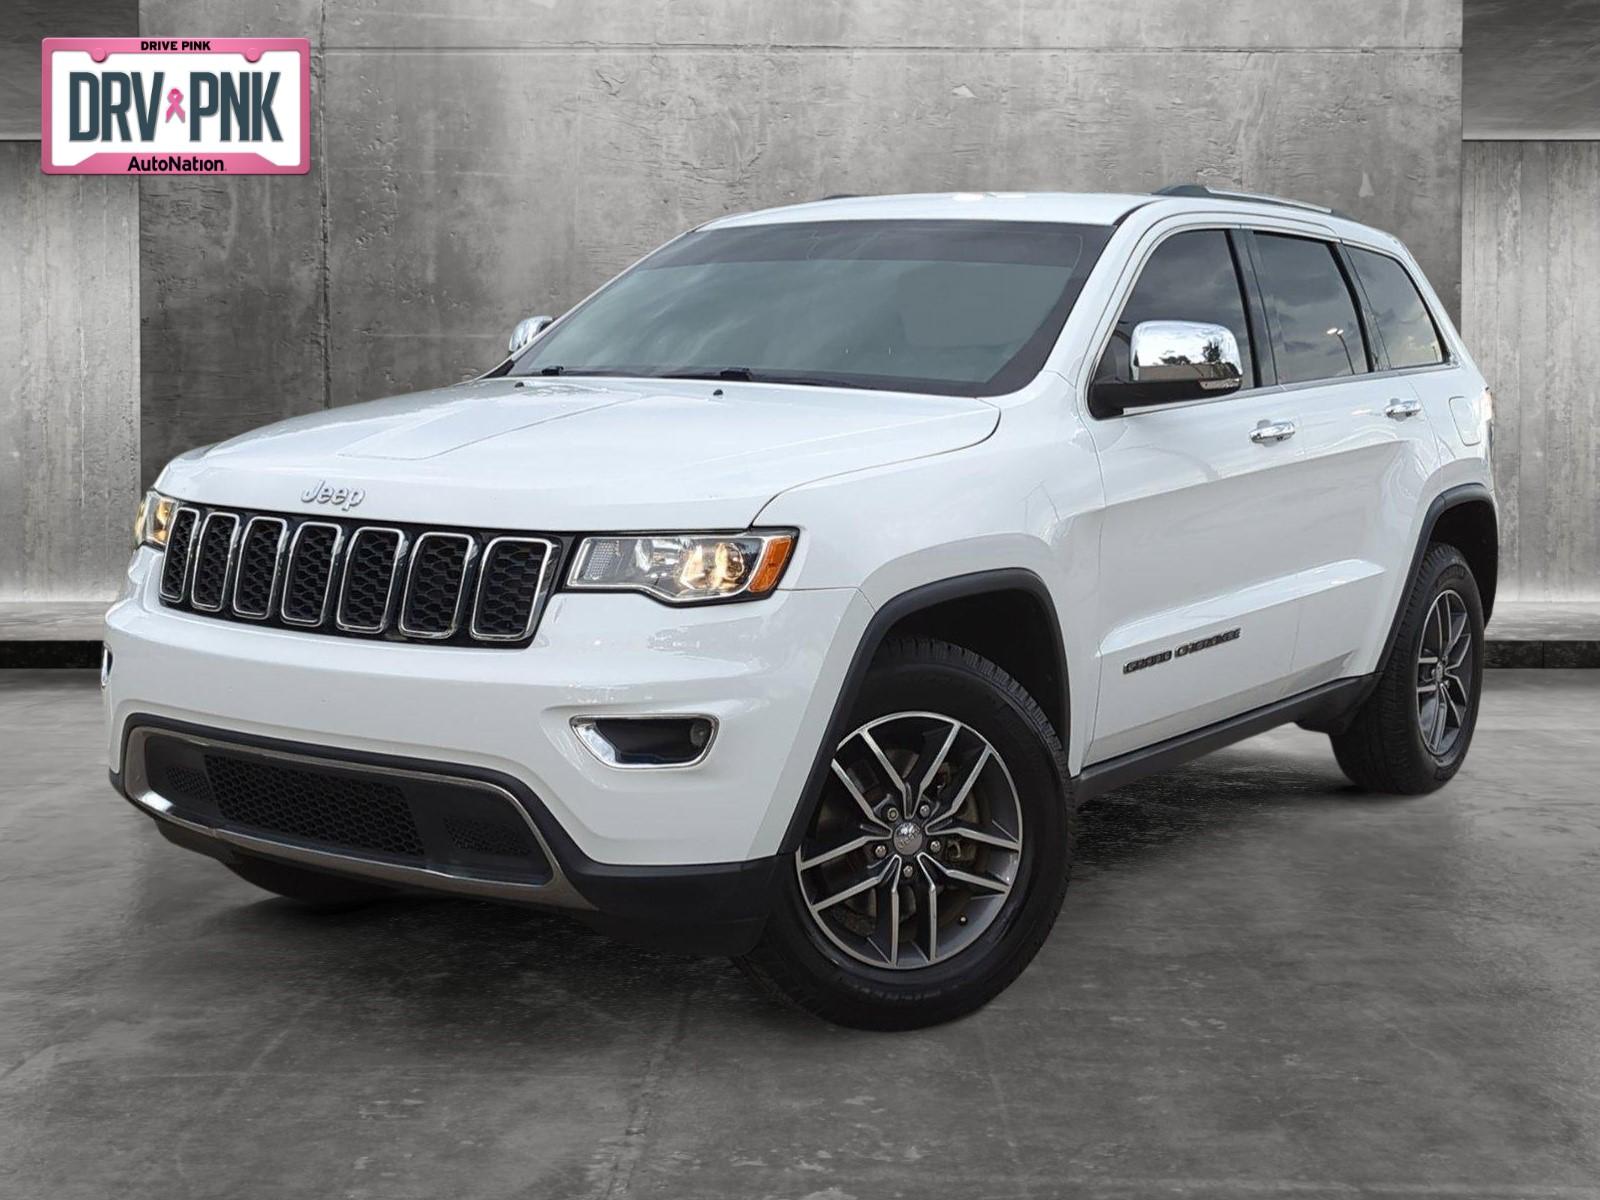 2018 Jeep Grand Cherokee Vehicle Photo in Ft. Myers, FL 33907